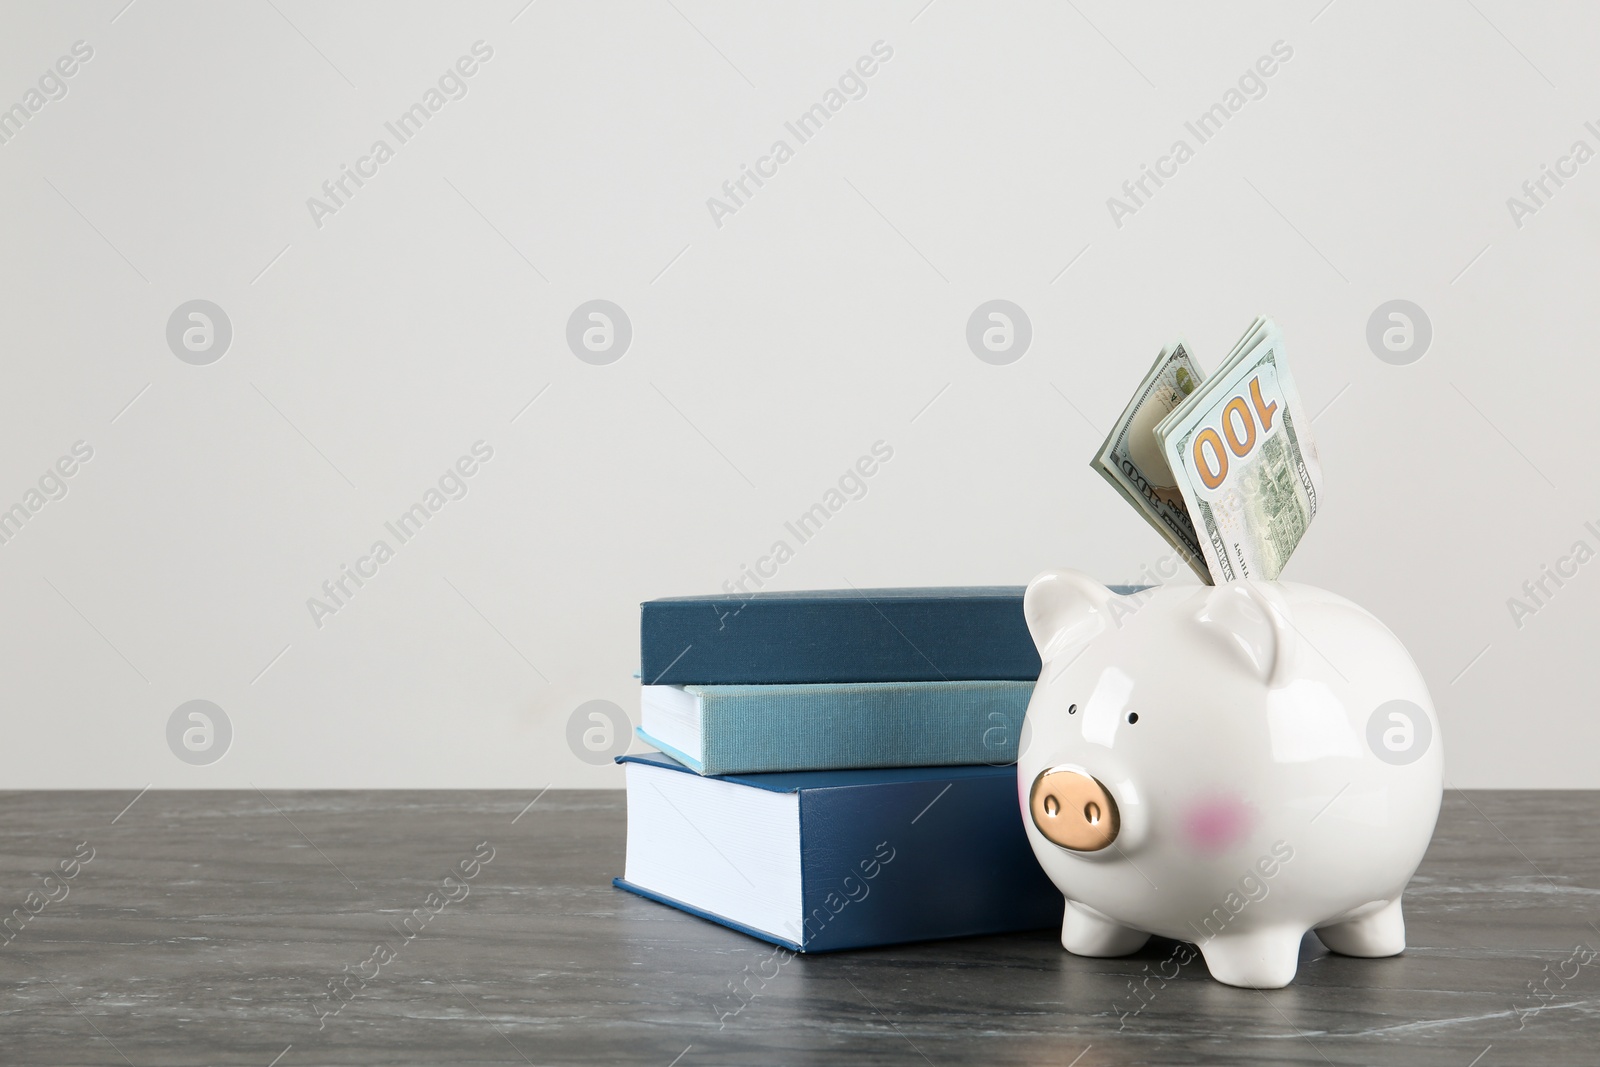 Photo of Piggy bank with dollars and books on table against white background. Space for text